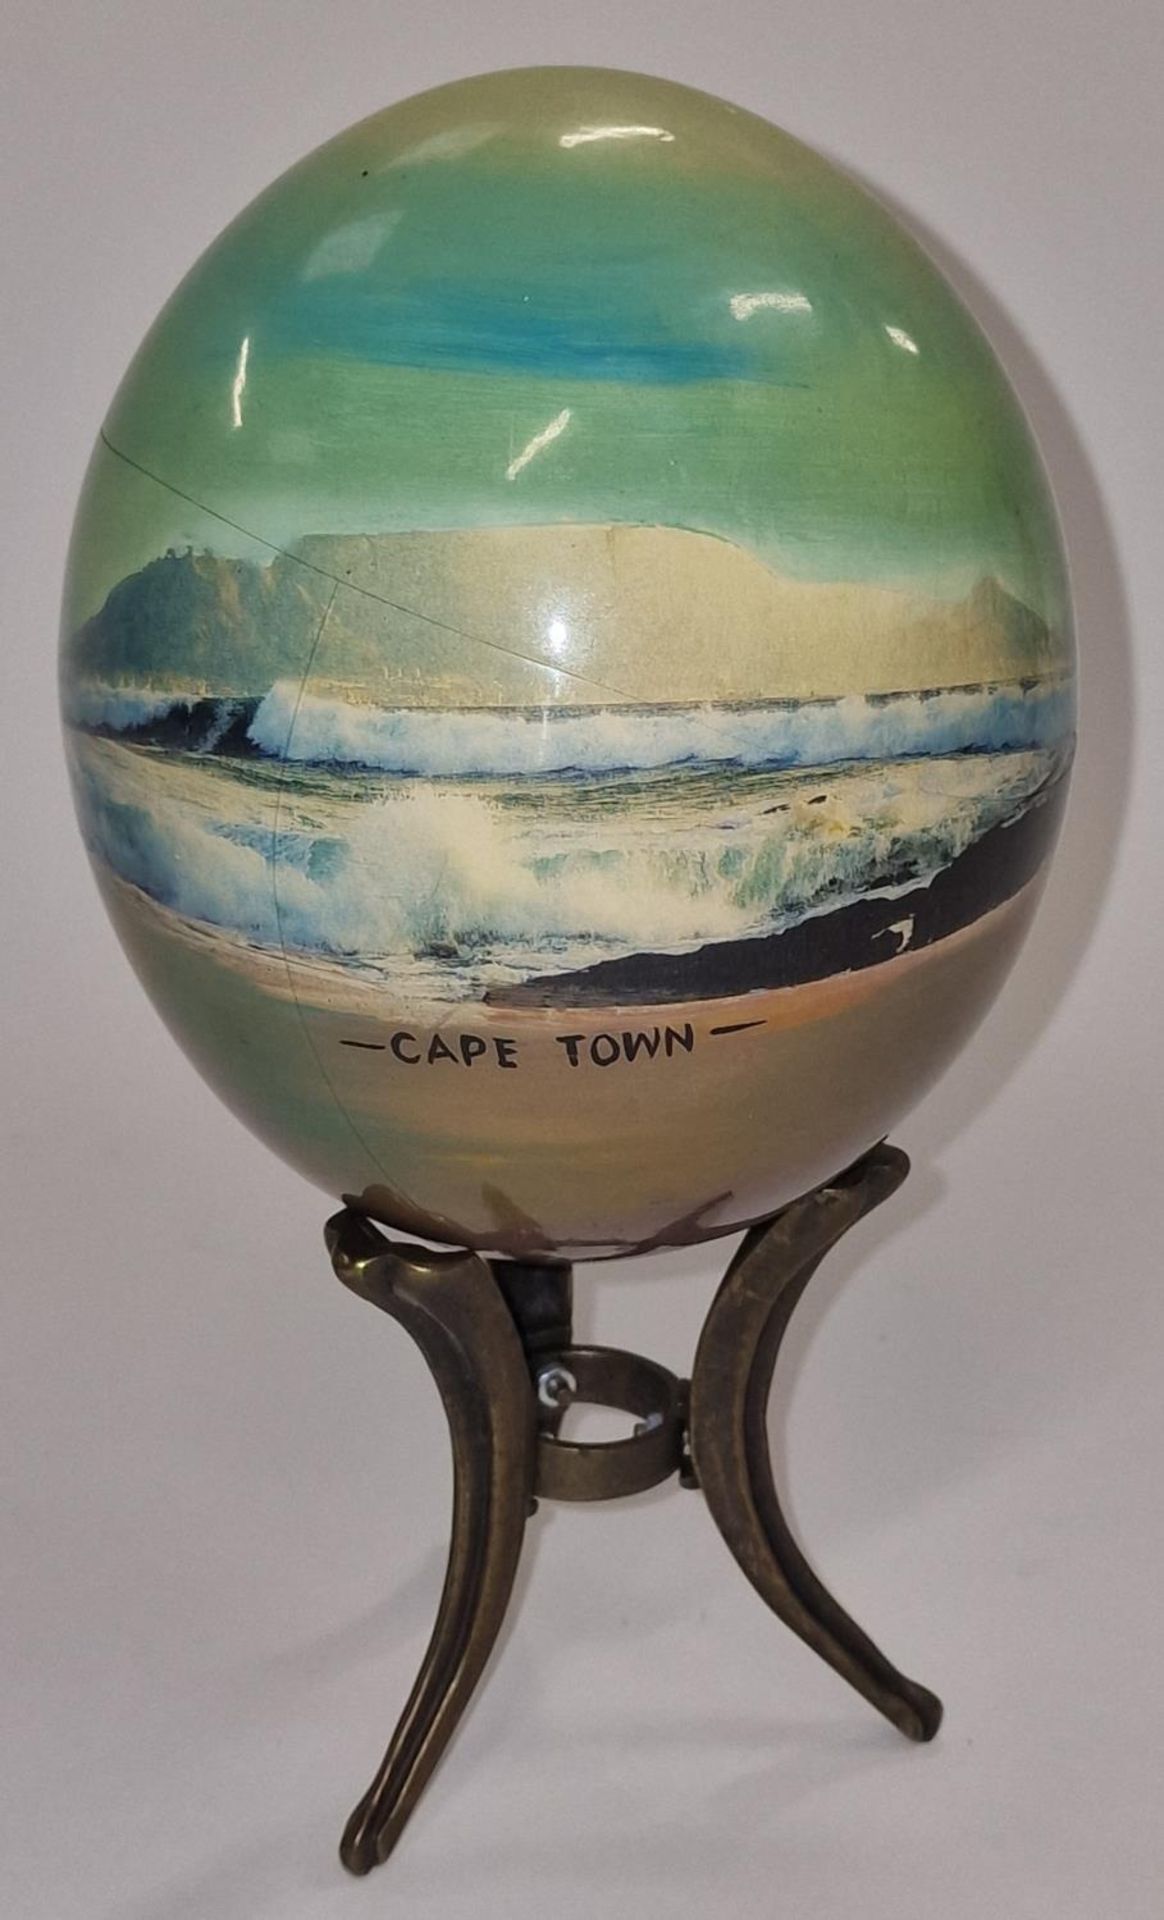 A painted ostrich egg on stand by "Julie Morgan" signed.